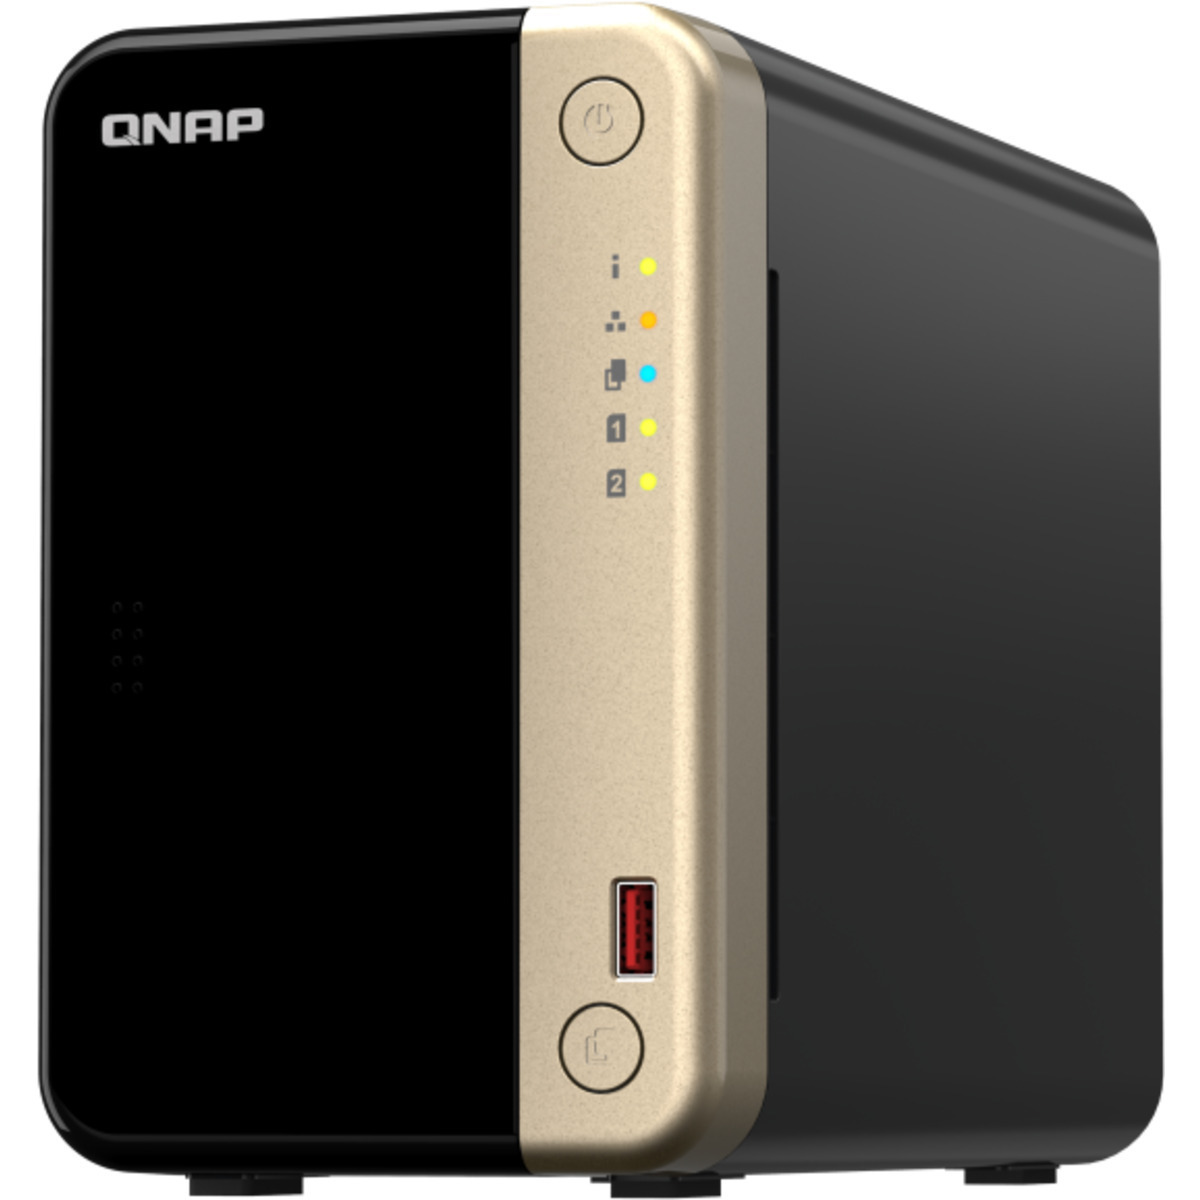 QNAP TS-264 24tb 2-Bay Desktop Multimedia / Power User / Business NAS - Network Attached Storage Device 2x12tb Seagate IronWolf Pro ST12000NT001 3.5 7200rpm SATA 6Gb/s HDD NAS Class Drives Installed - Burn-In Tested - ON SALE TS-264